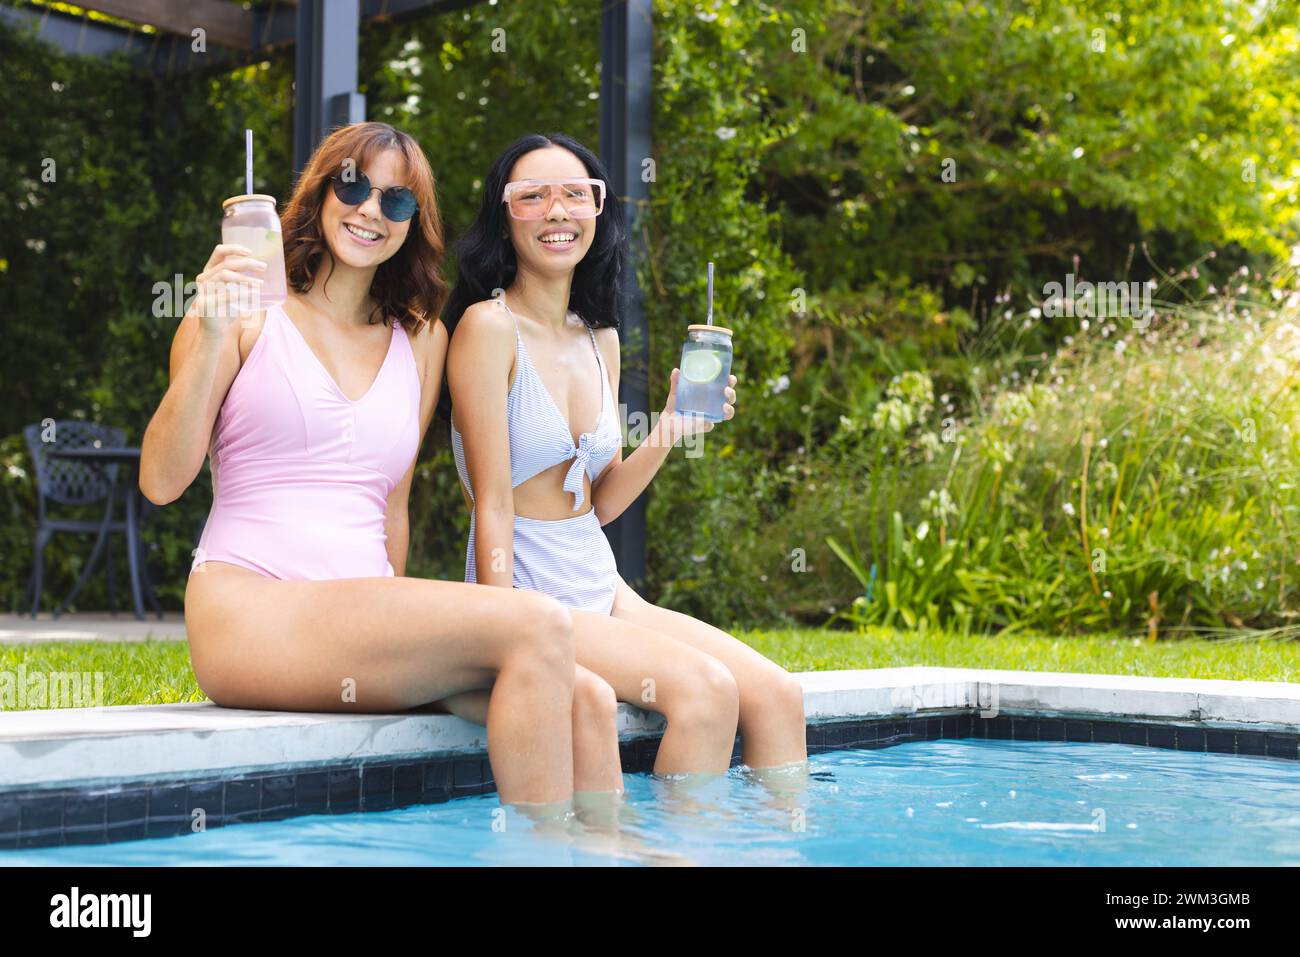 Two women enjoy a sunny day by the pool, with copy space Stock Photo